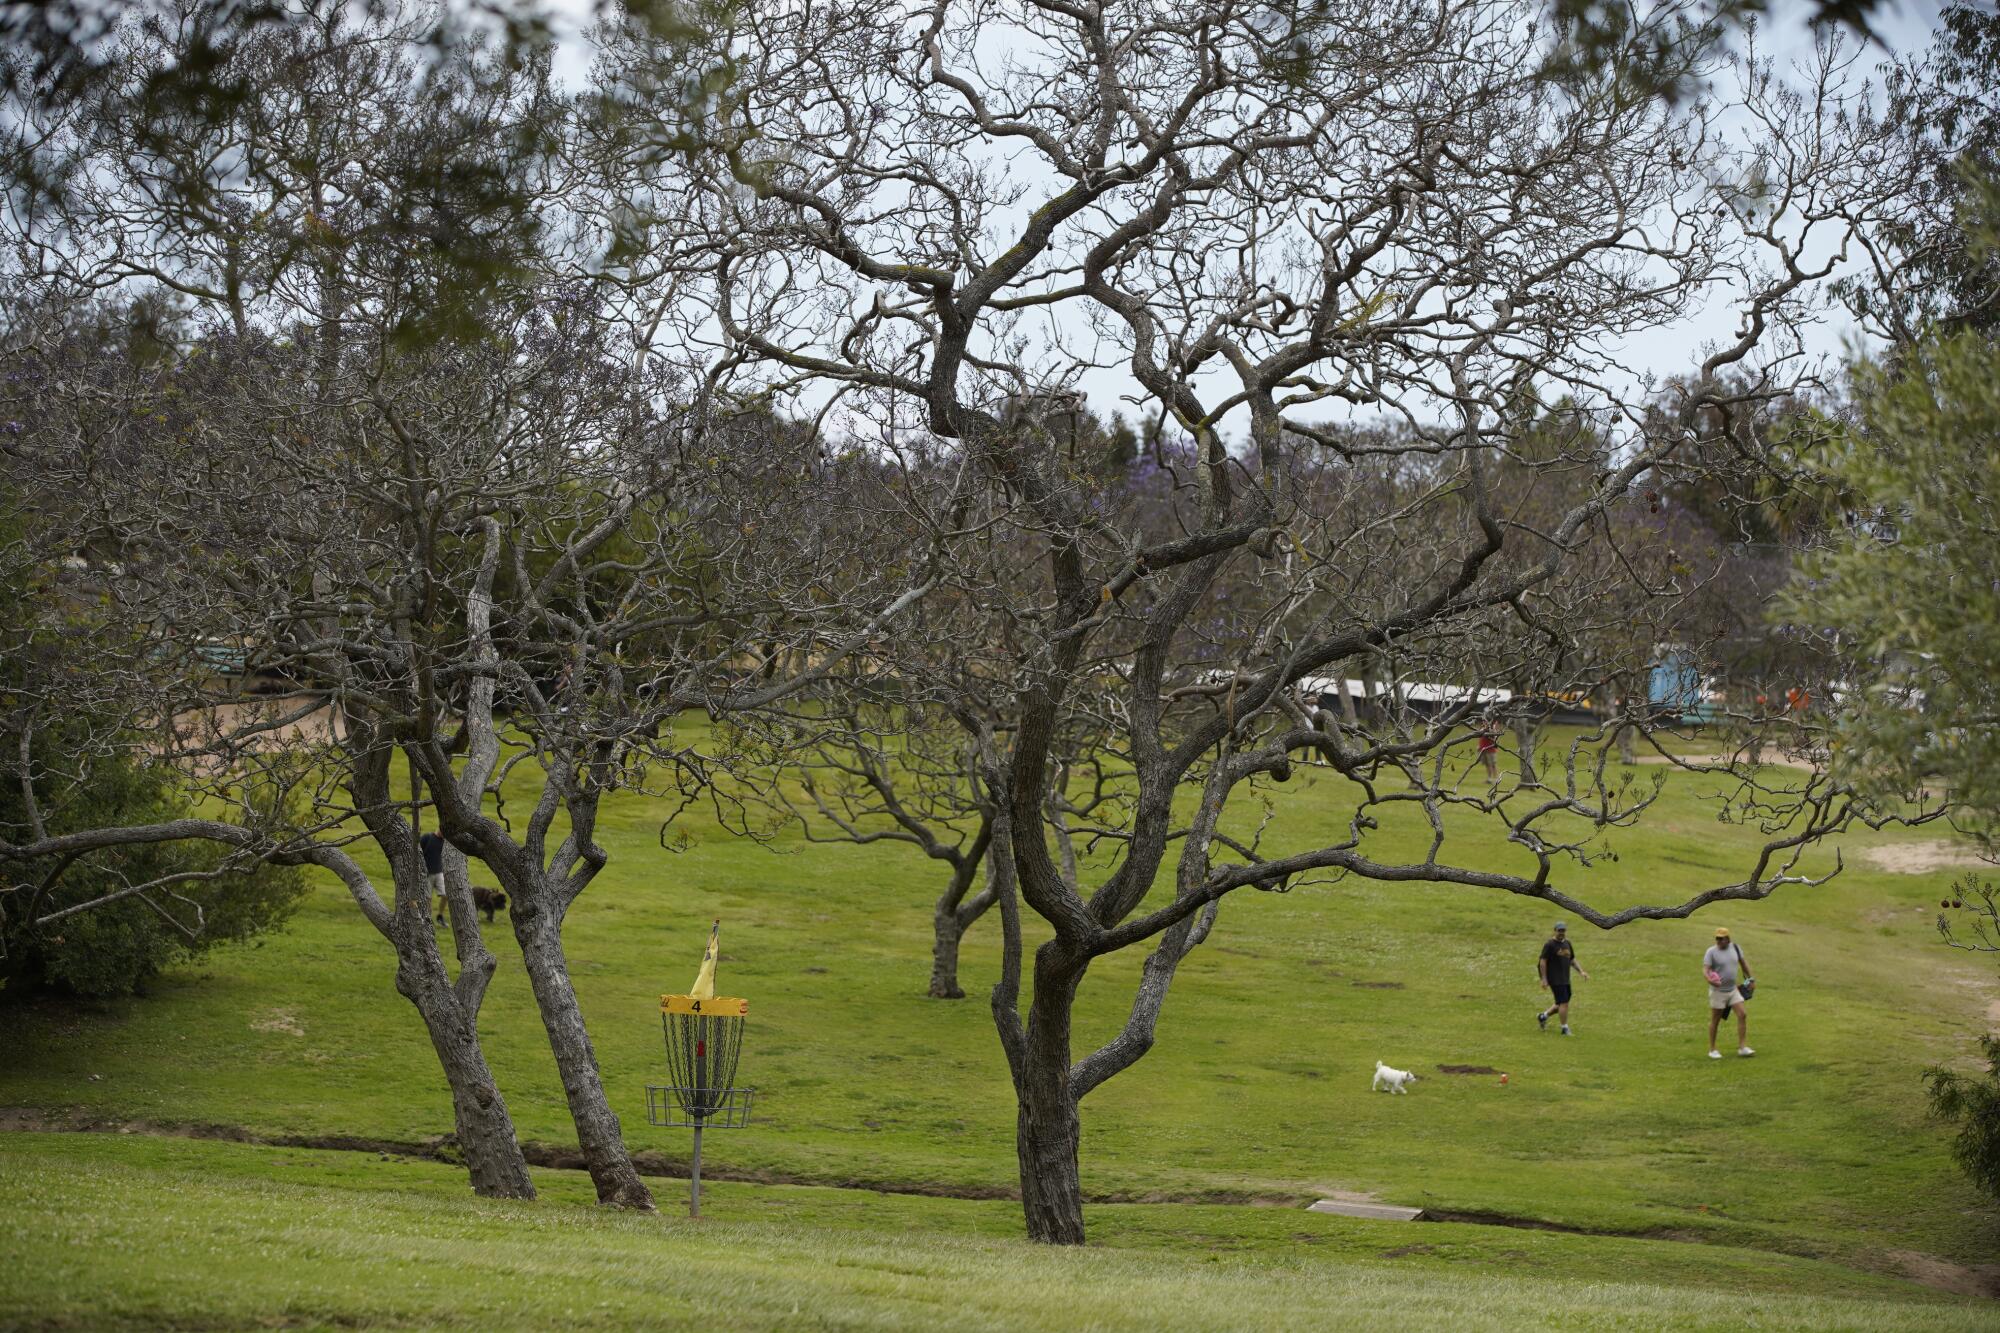 Dozens of jacarandas at the Morley Field Disc Golf Course are barren, with only a few sprouting green leaves and buds.